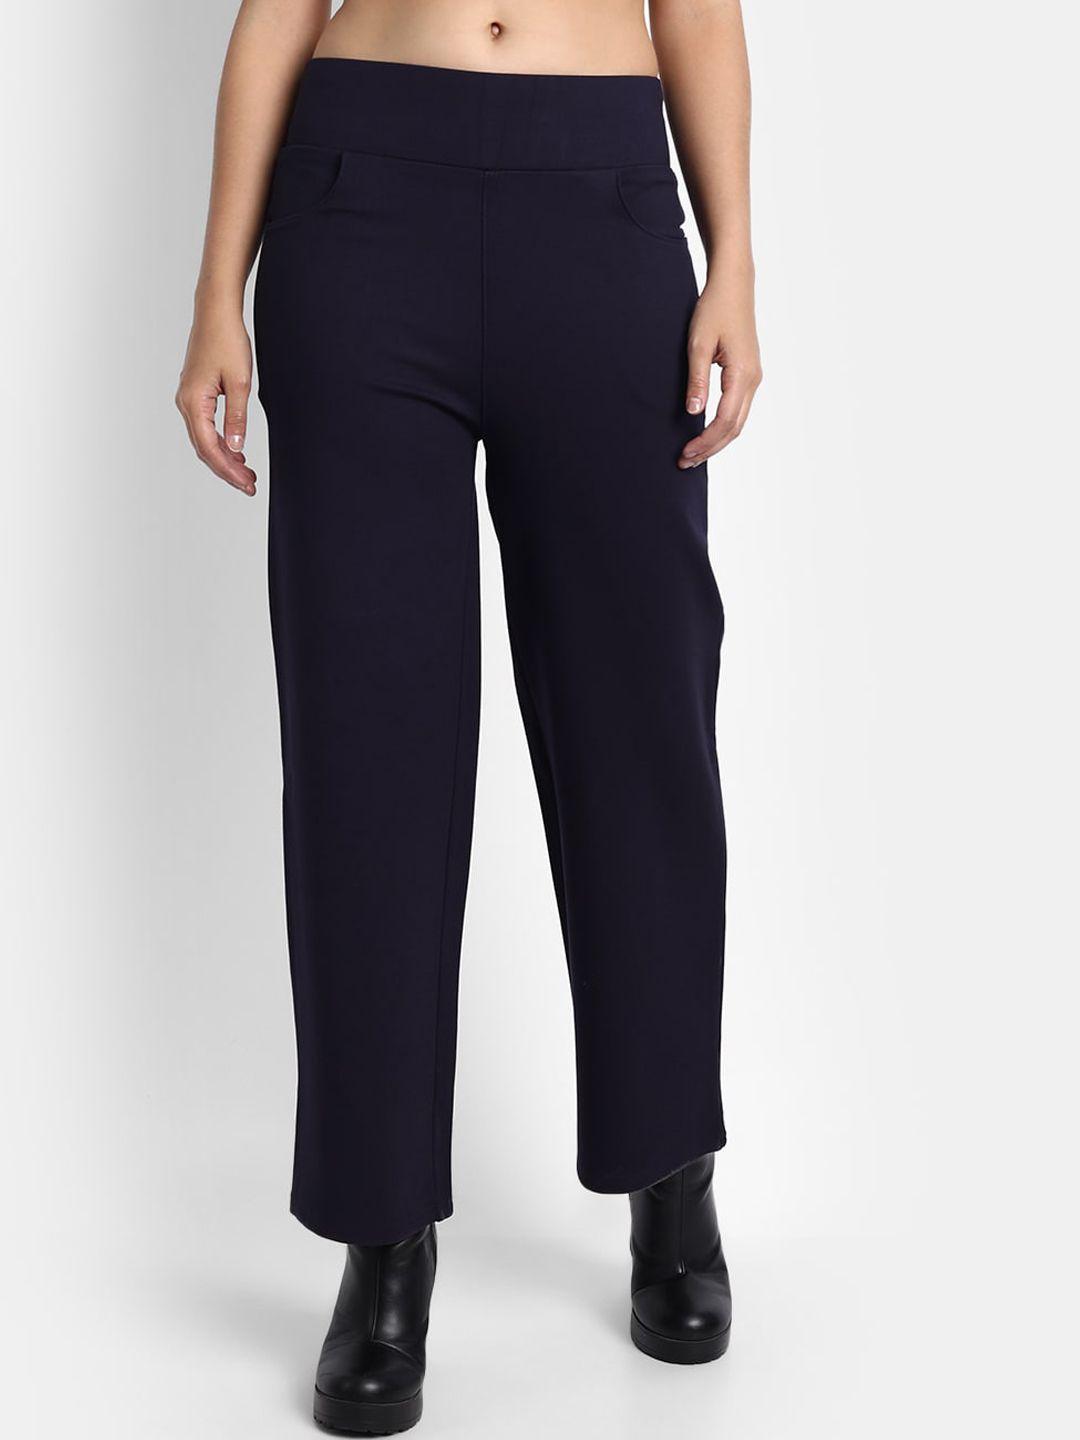 broadstar-women-navy-blue-straight-fit-high-rise-trousers